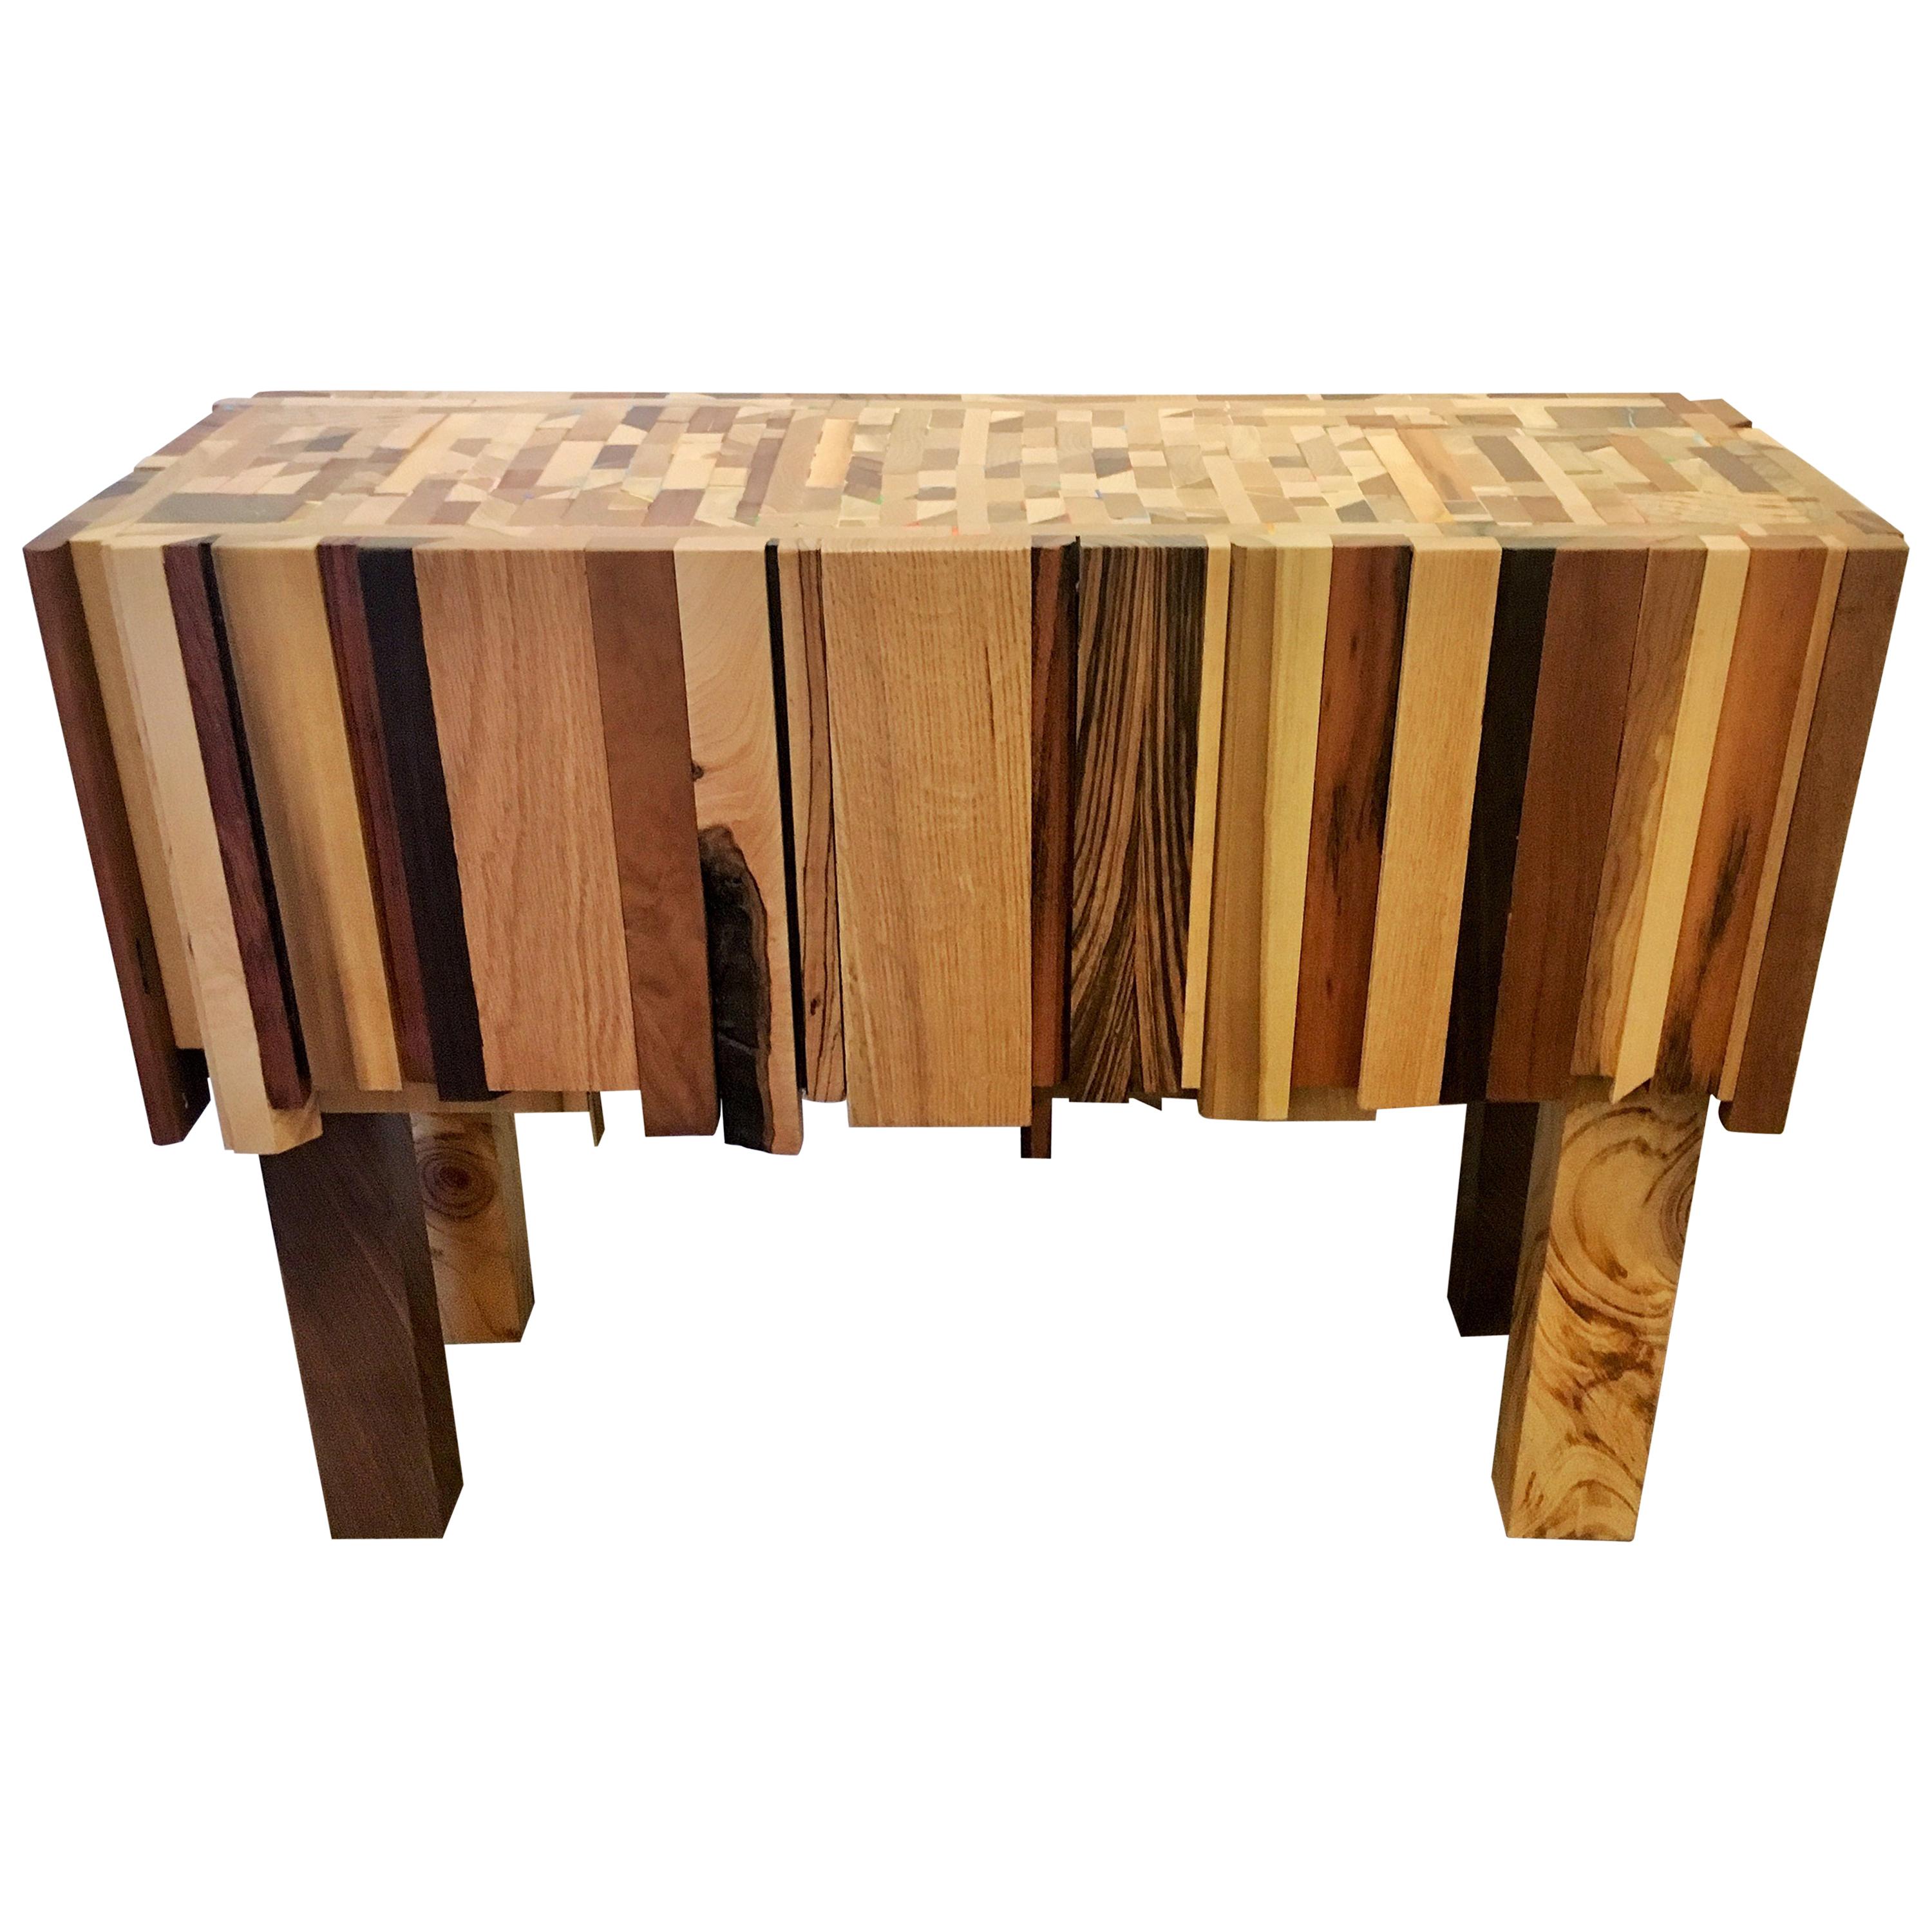 Mixed Wood and Acrylic Paint Table by Artist Ben Darby For Sale